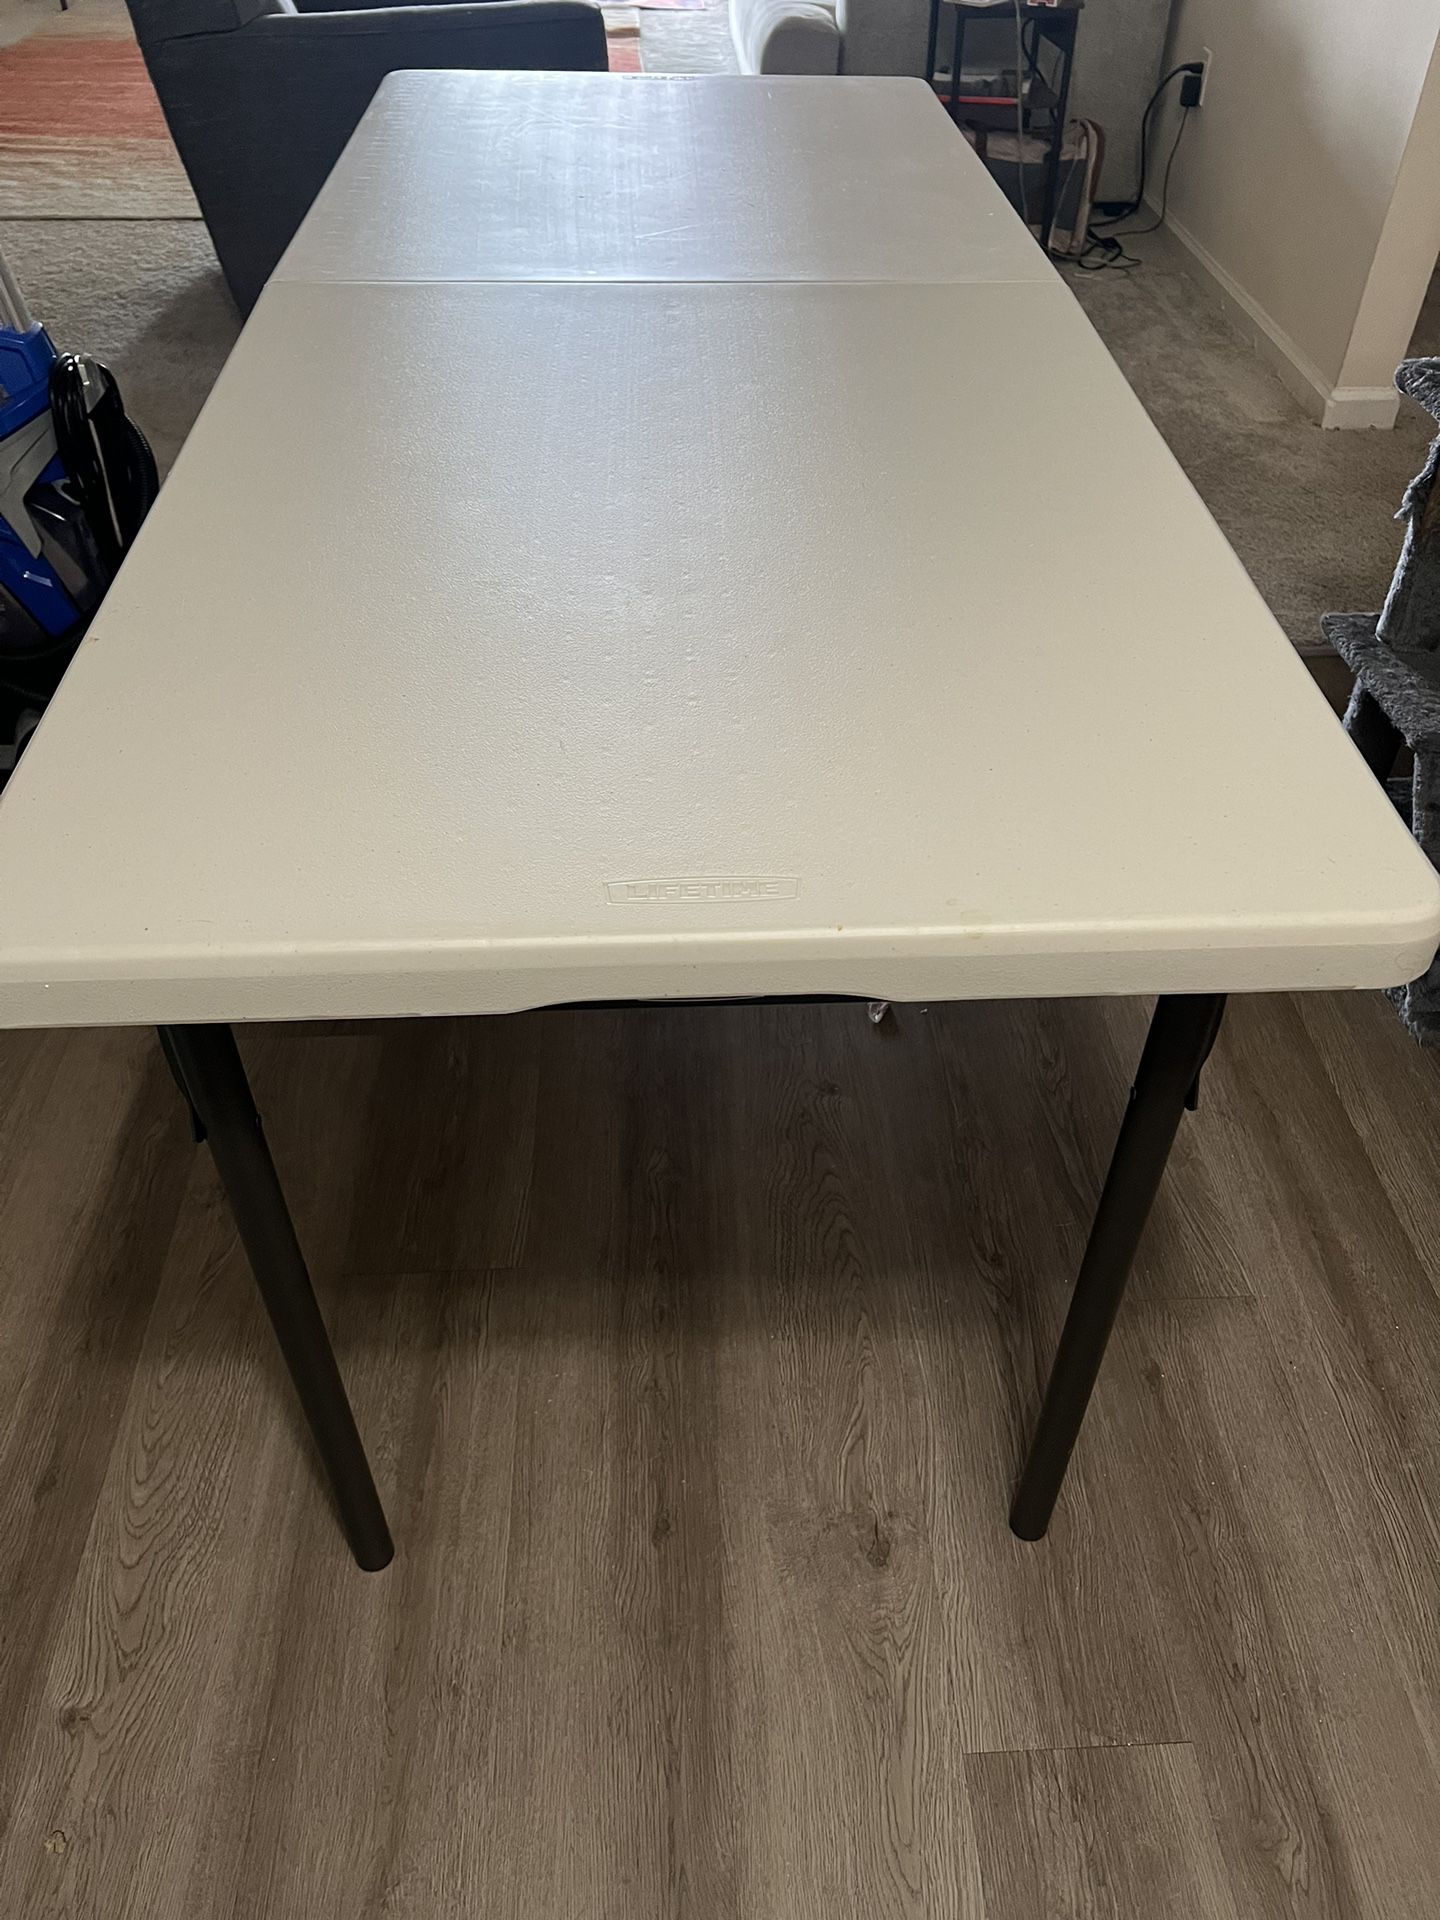 6ft Folding Table 8 Chairs